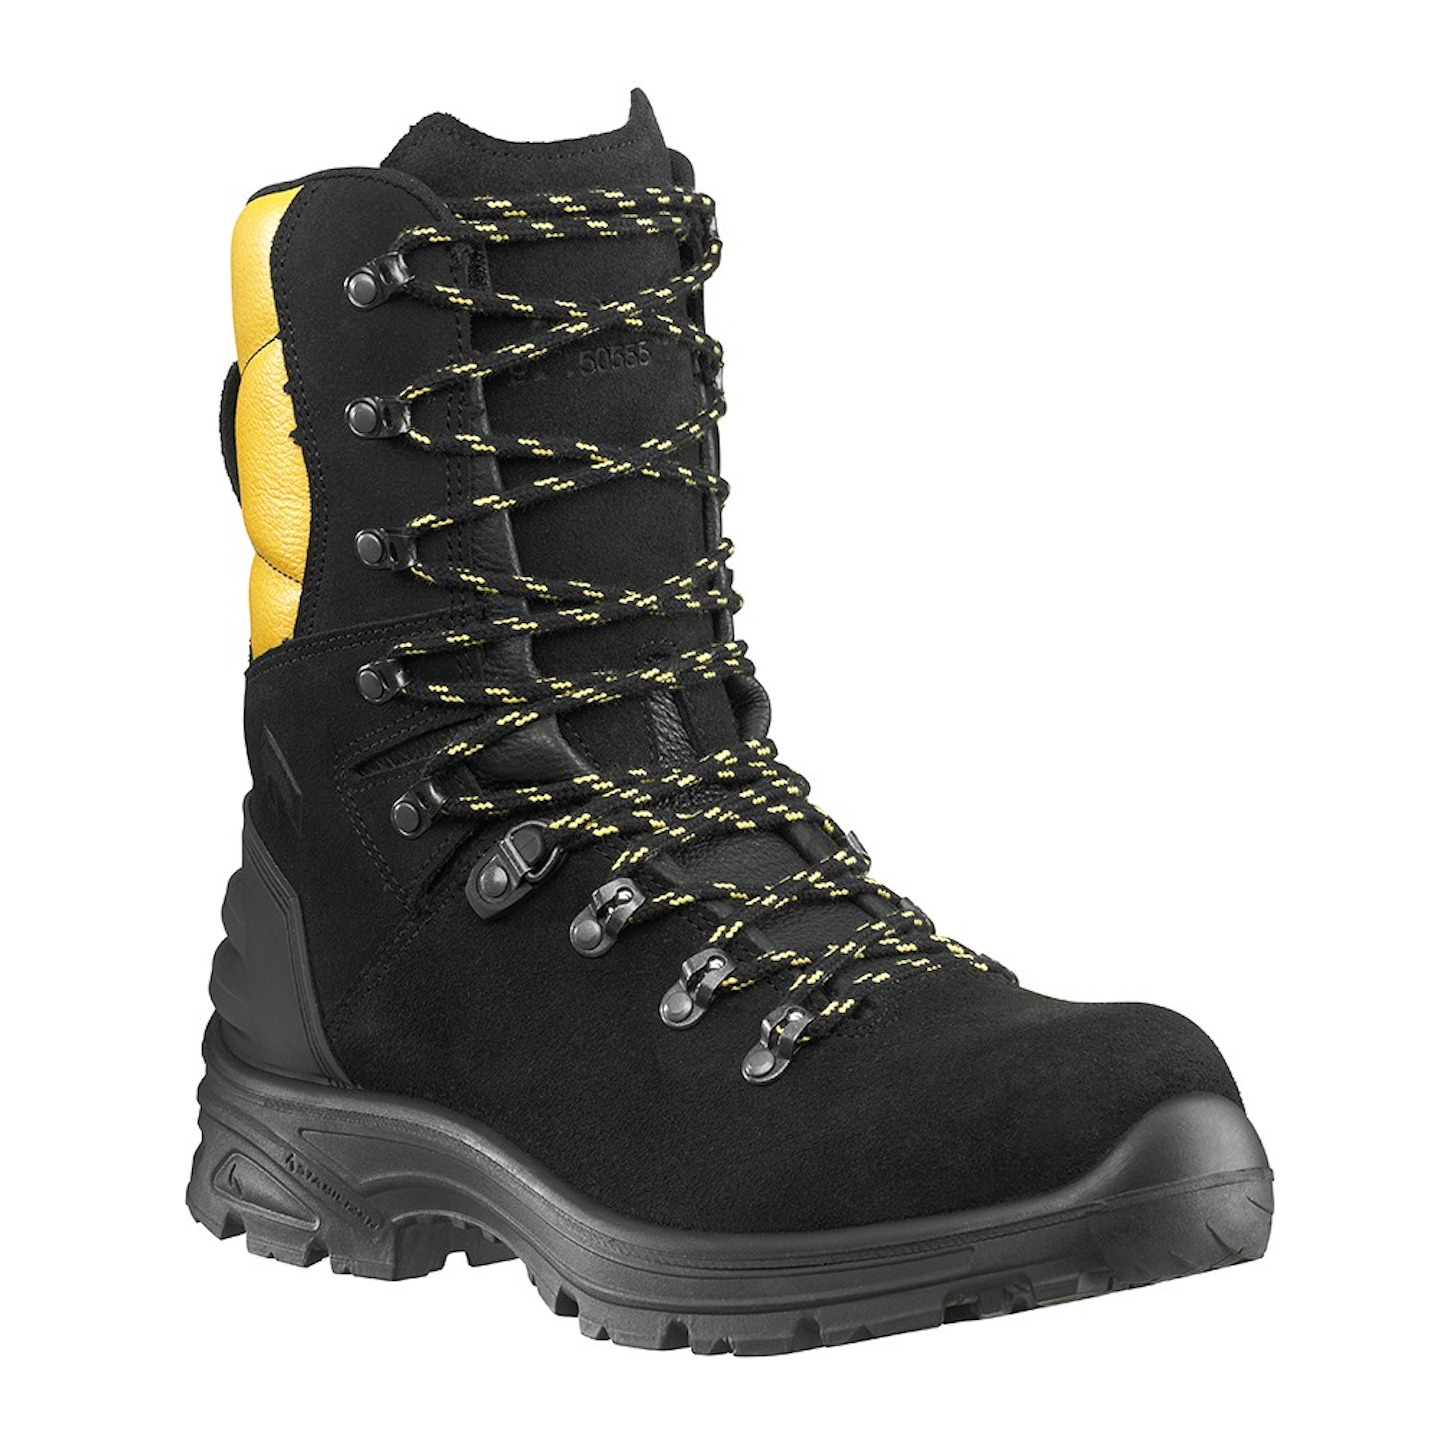 HAIX North America Introduces New Boot, the Missoula 2.0 -- Firefighter ...